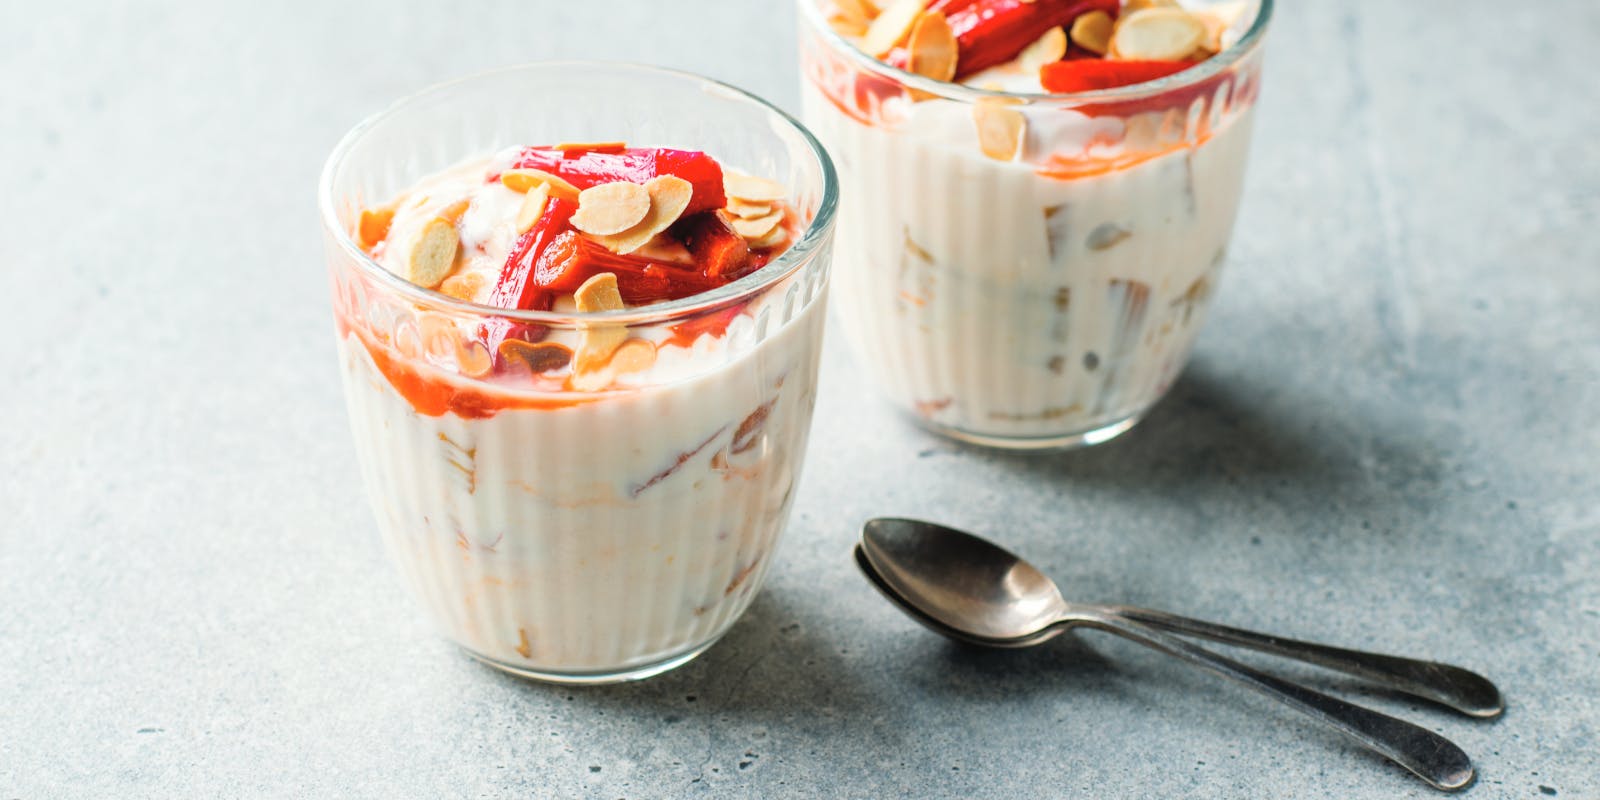 Baked rhubarb posset with almonds